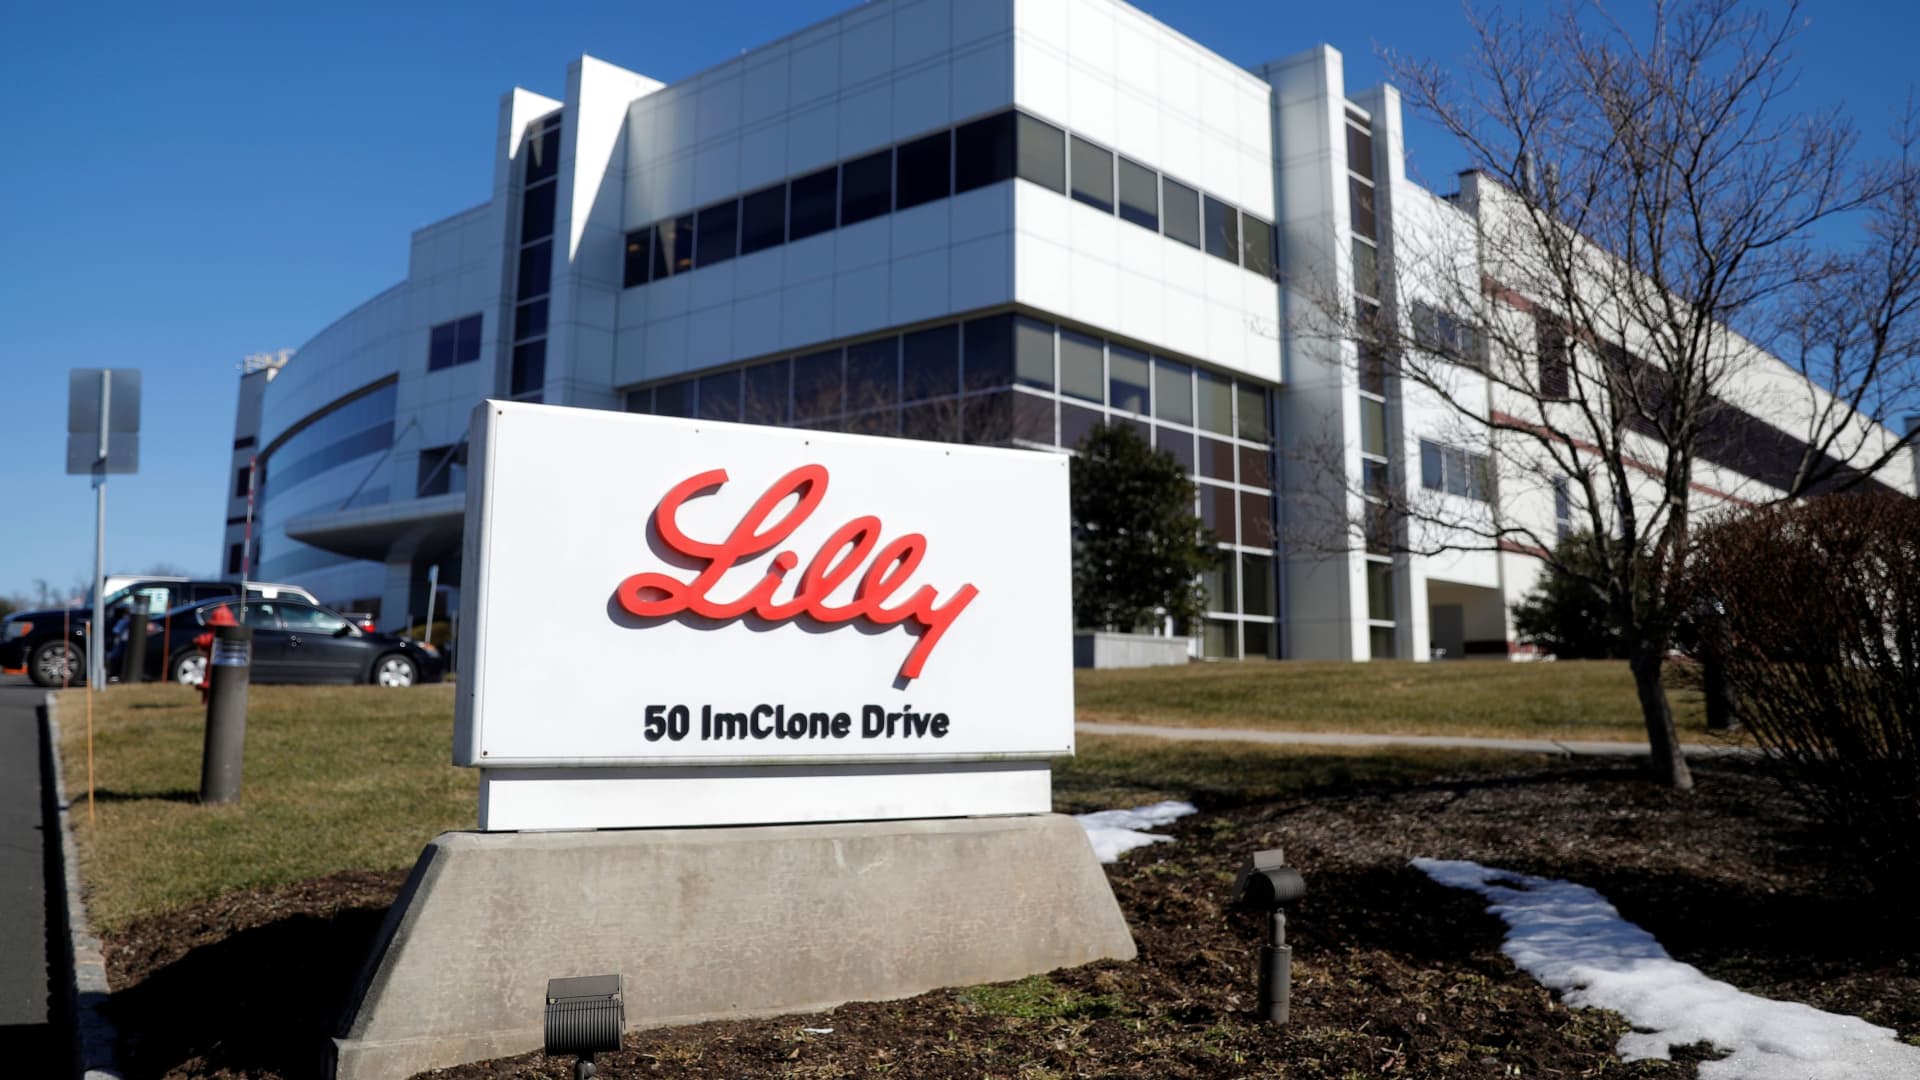 Large Indiana employers Eli Lilly and Cummins speak out about the state’s new restrictive abortion law